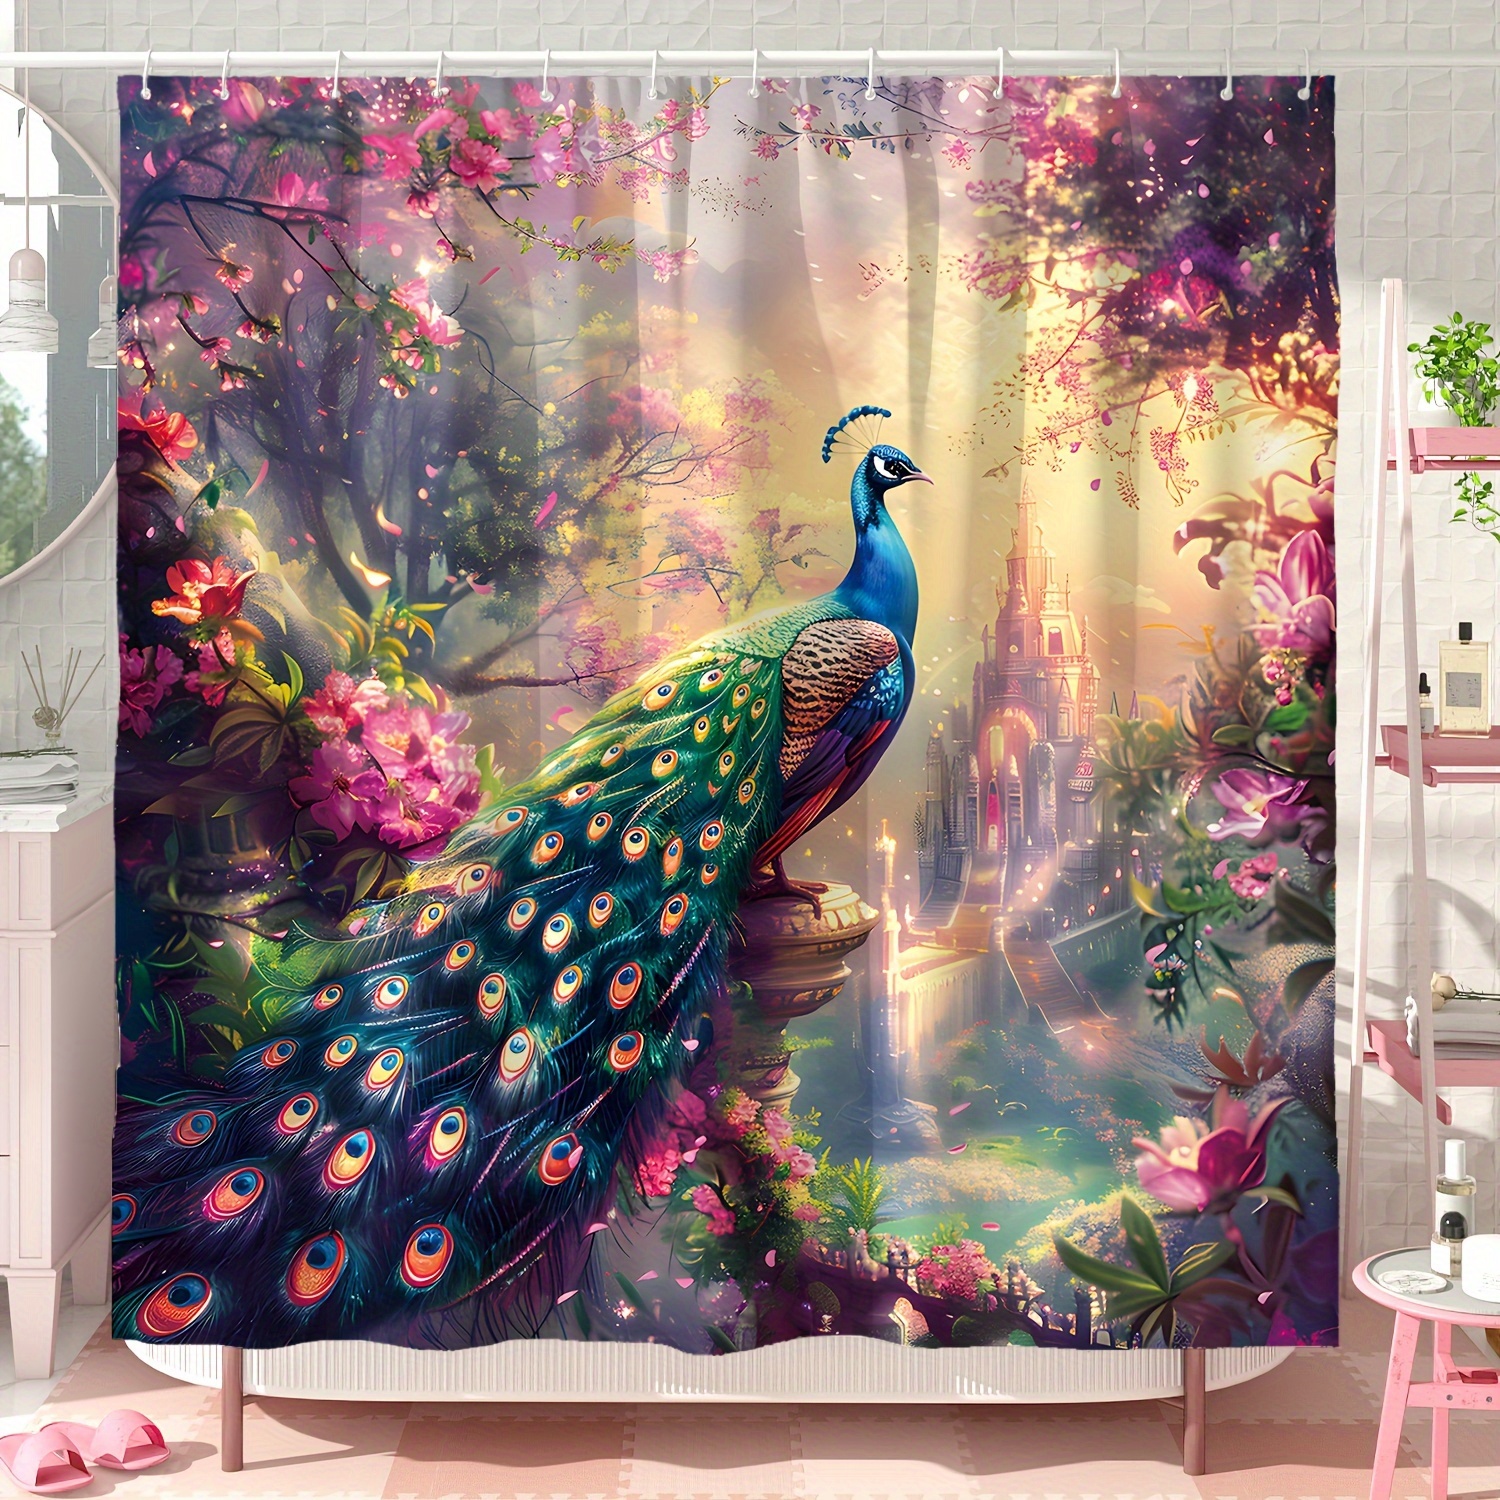 

1pc Fairytale Peacock Shower Curtain, Floral Forest Design, Elegant Polyester Bathroom Decor, Waterproof, Machine Washable, Gold Pink Green, With 12 Hooks For Home Or Bathtub